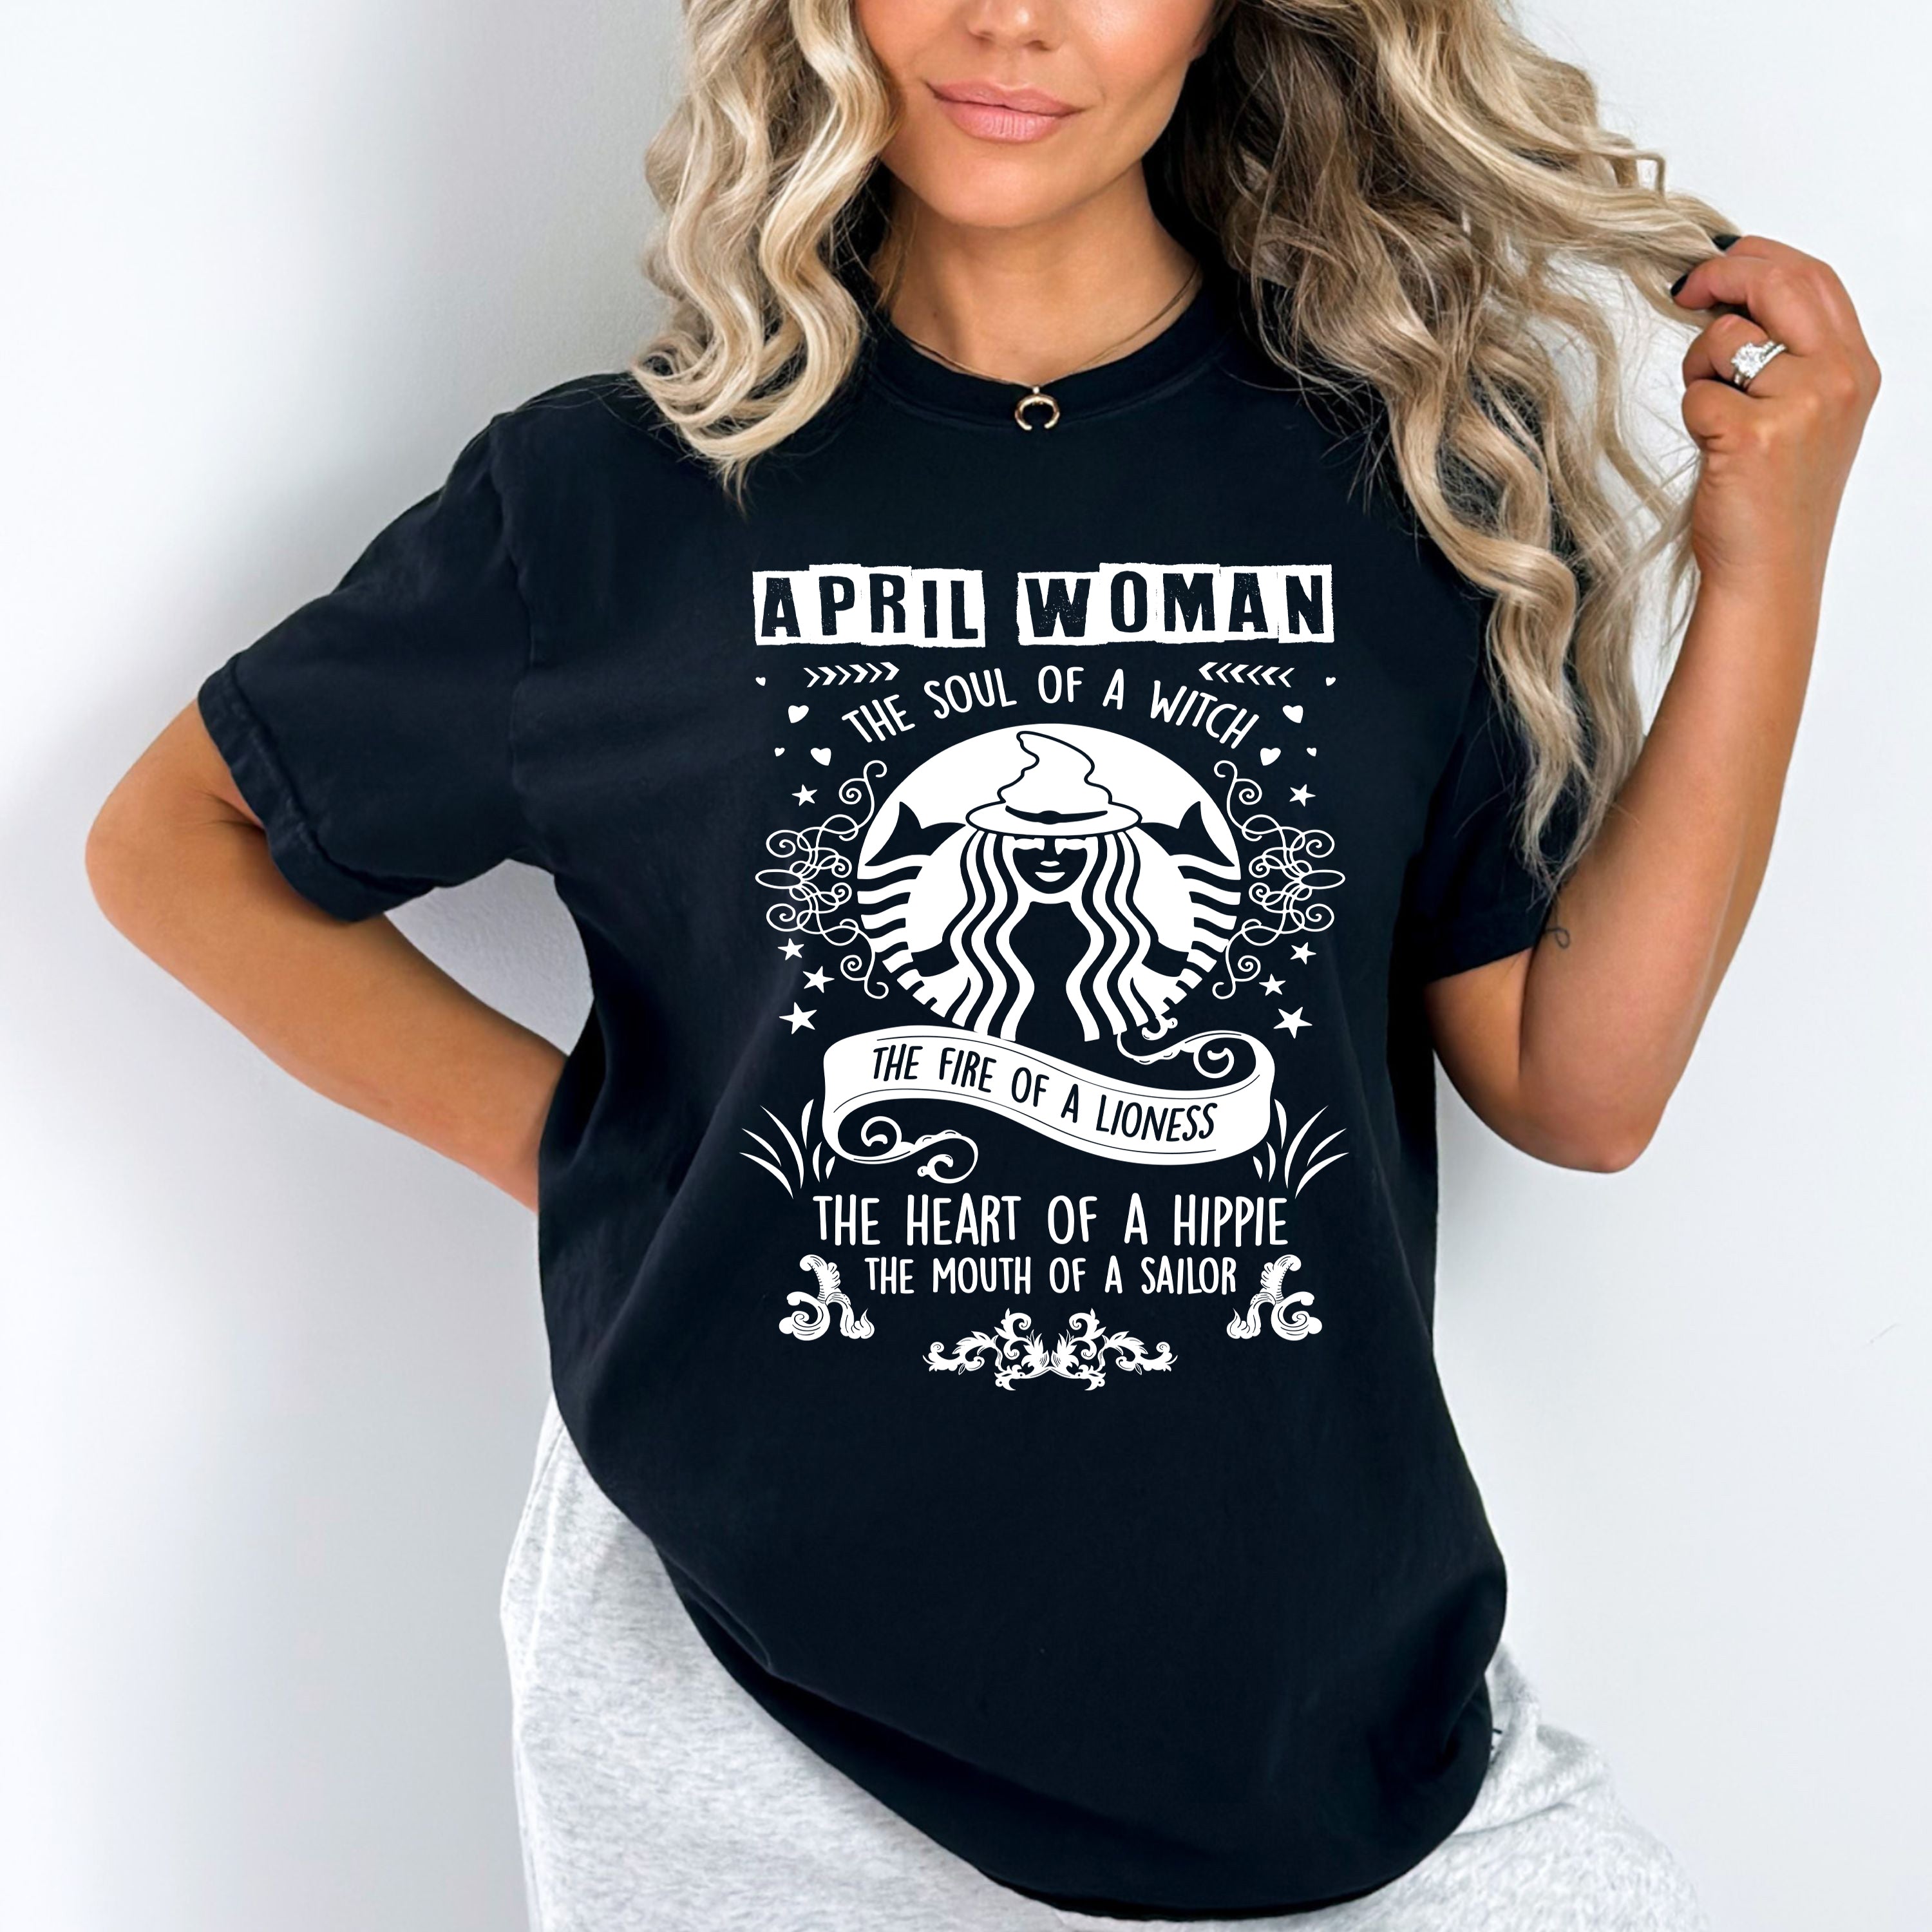 "APRIL WOMAN The Soul Of A Witch The Fire Of A Lioness The Heart Of A Hippie...",T-Shirt.